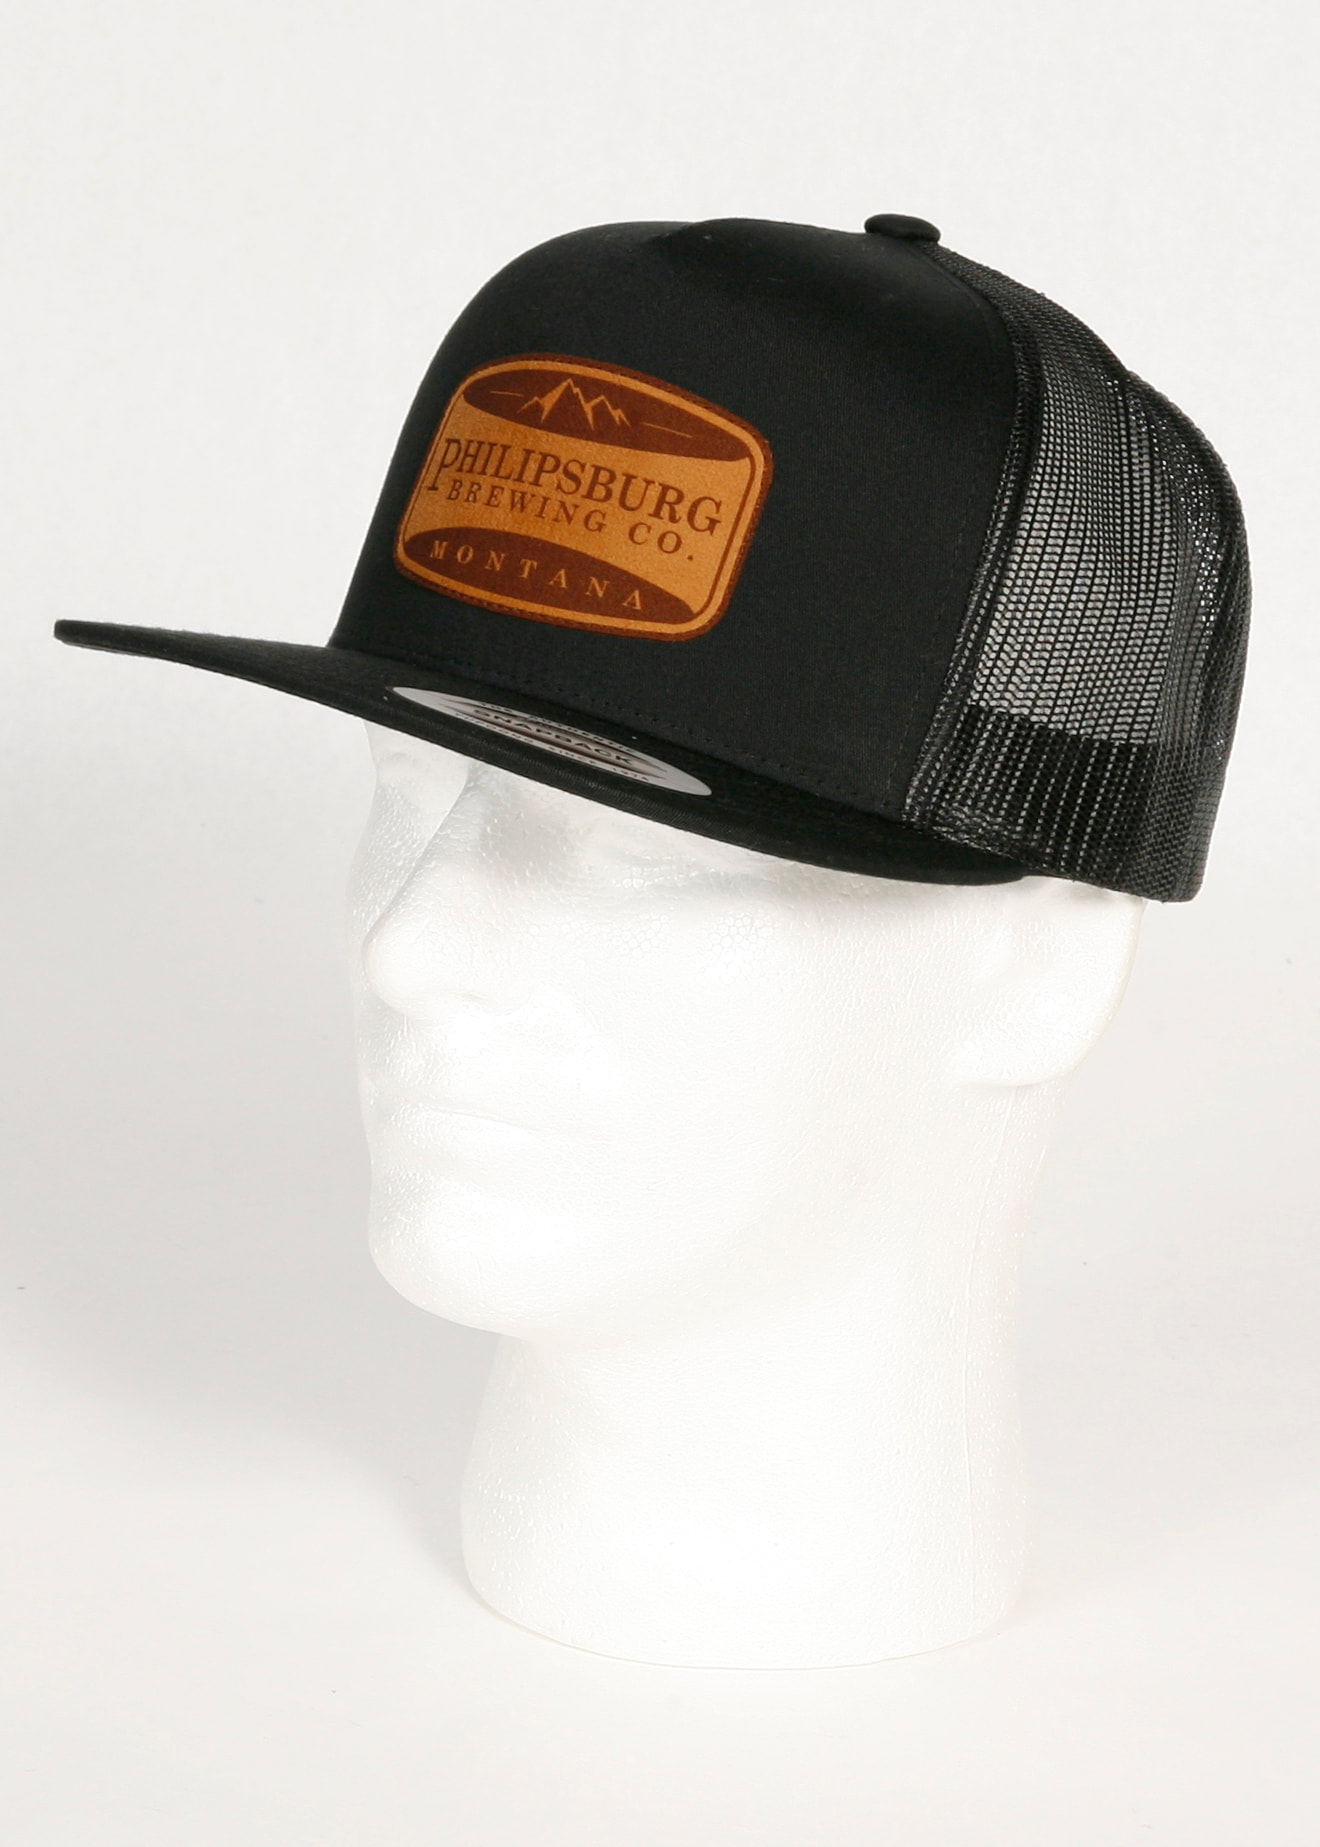 Philipsburg Brewing Company Flexfit Trucker with Suede Patch